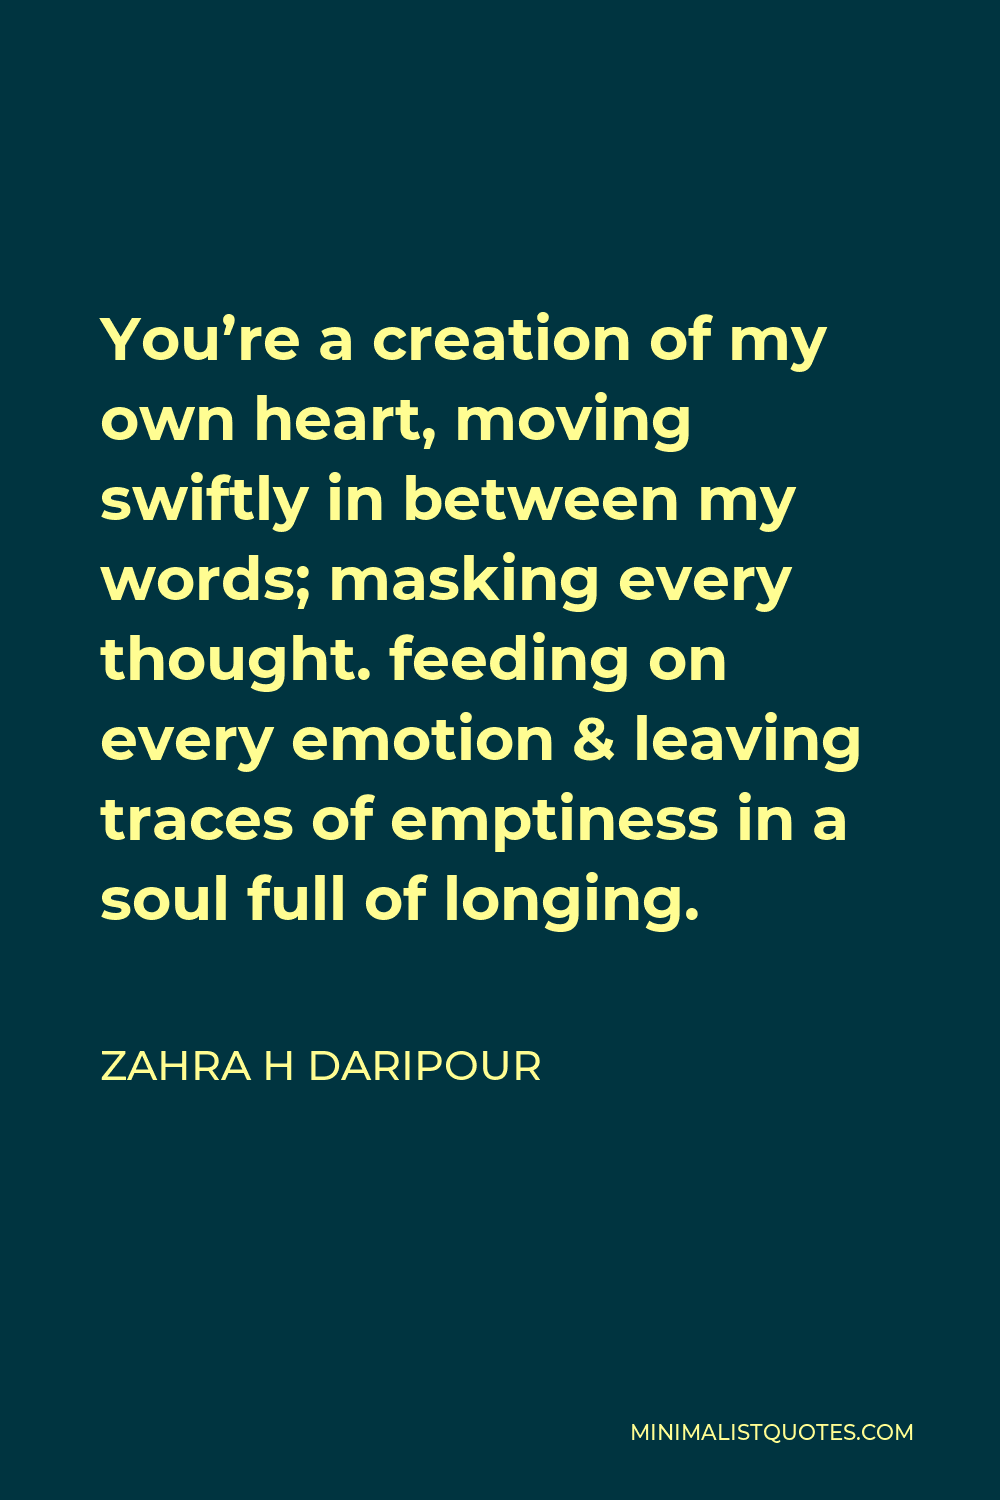 Zahra H Daripour Quote - You’re a creation of my own heart, moving swiftly in between my words; masking every thought. feeding on every emotion & leaving traces of emptiness in a soul full of longing.